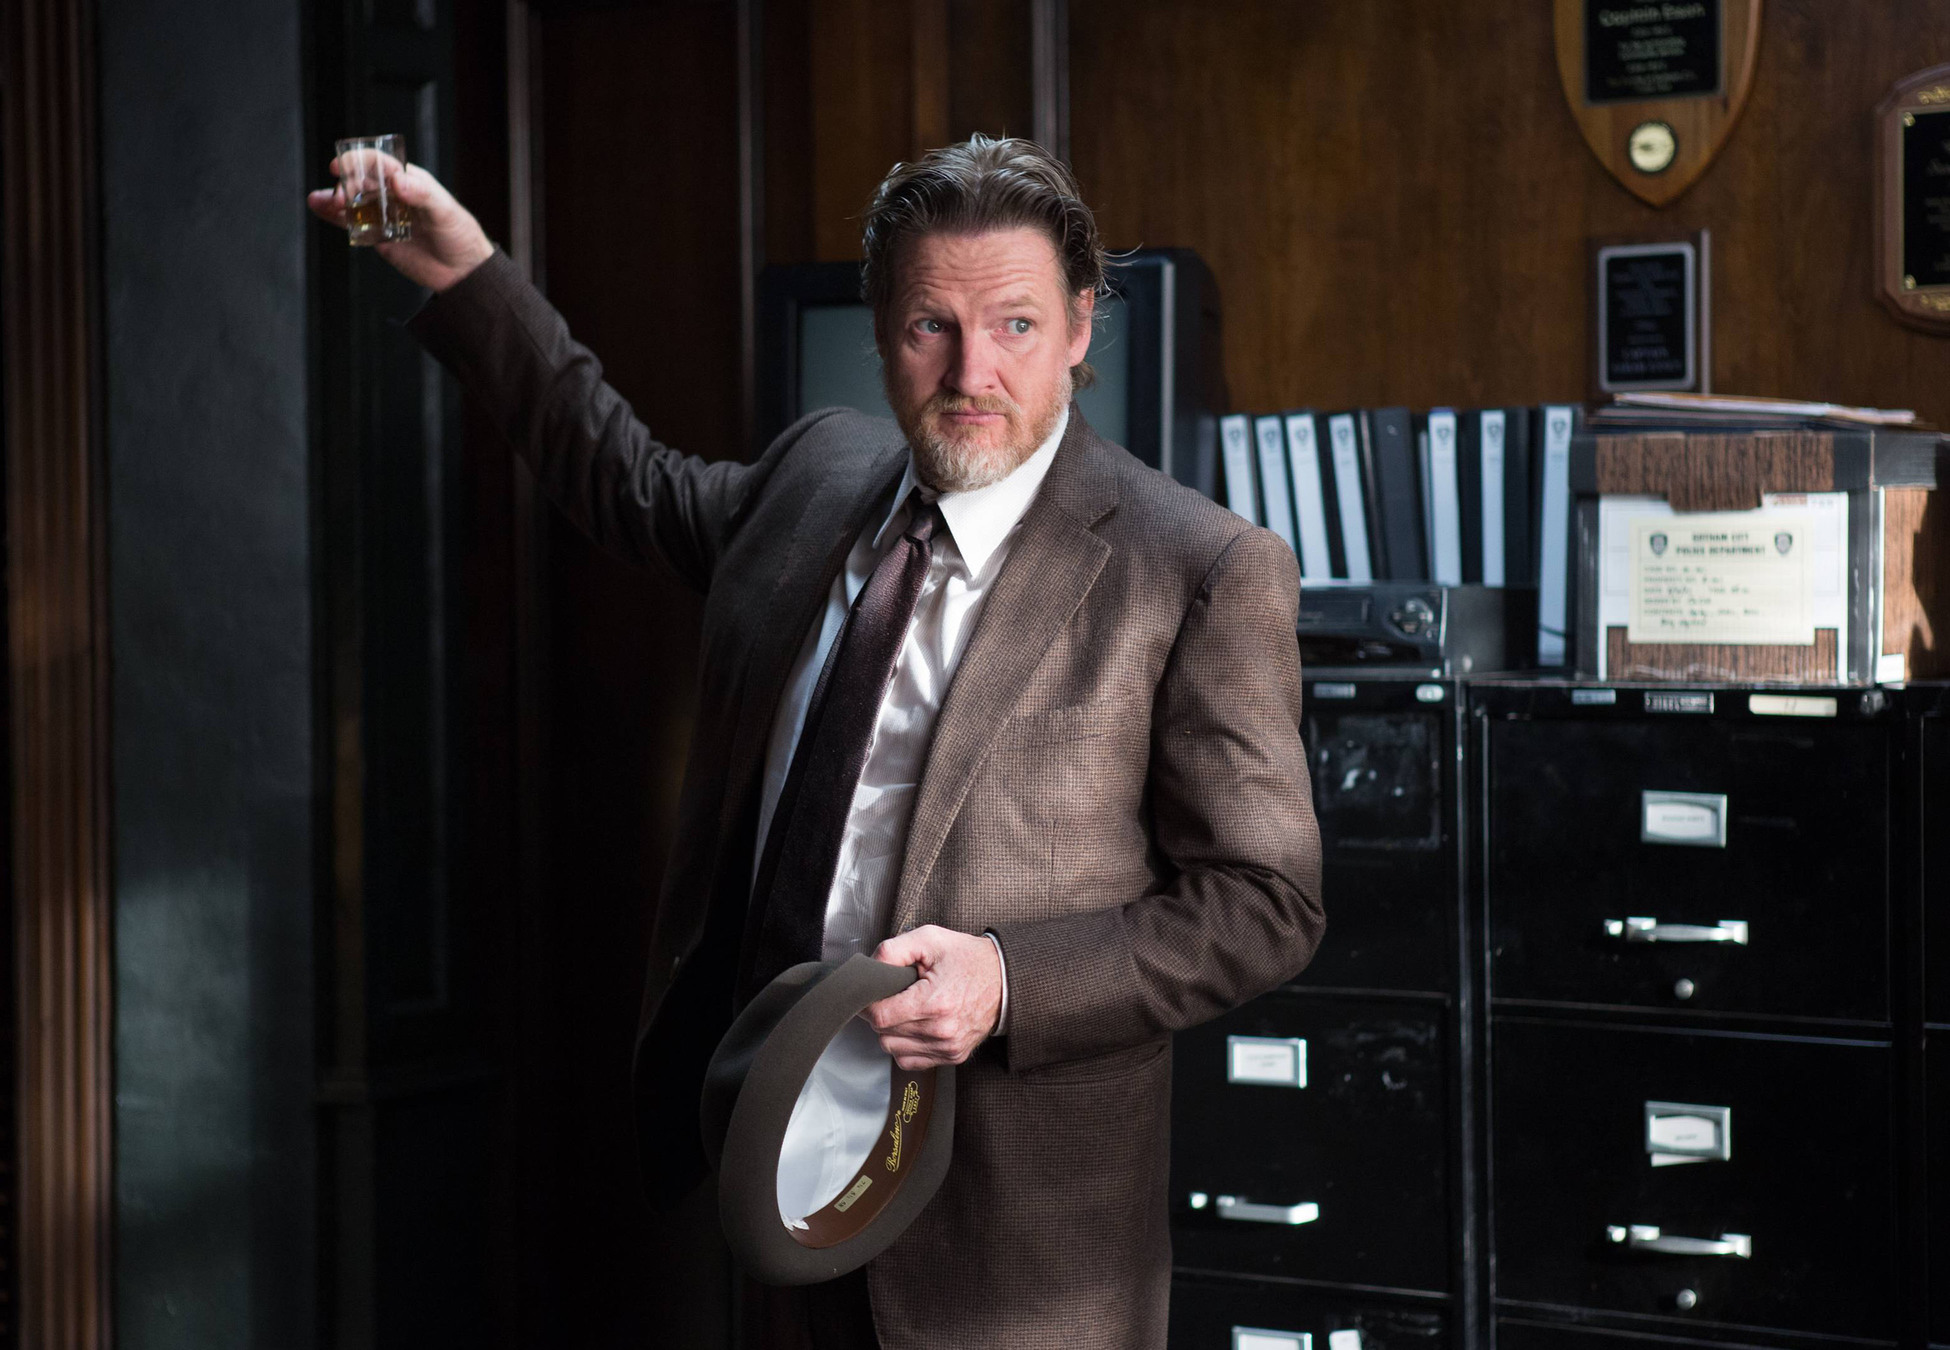 GOTHAM: Detective Bullock (Donal Logue) celebrates a victory in the "Selina Kyle" episode of GOTHAM airing Monday, Sept. 29 (8:00-9:00 PM ET/PT) on FOX. Â©2014 Fox Broadcasting Co. Cr: Jessica Miglio/FOX